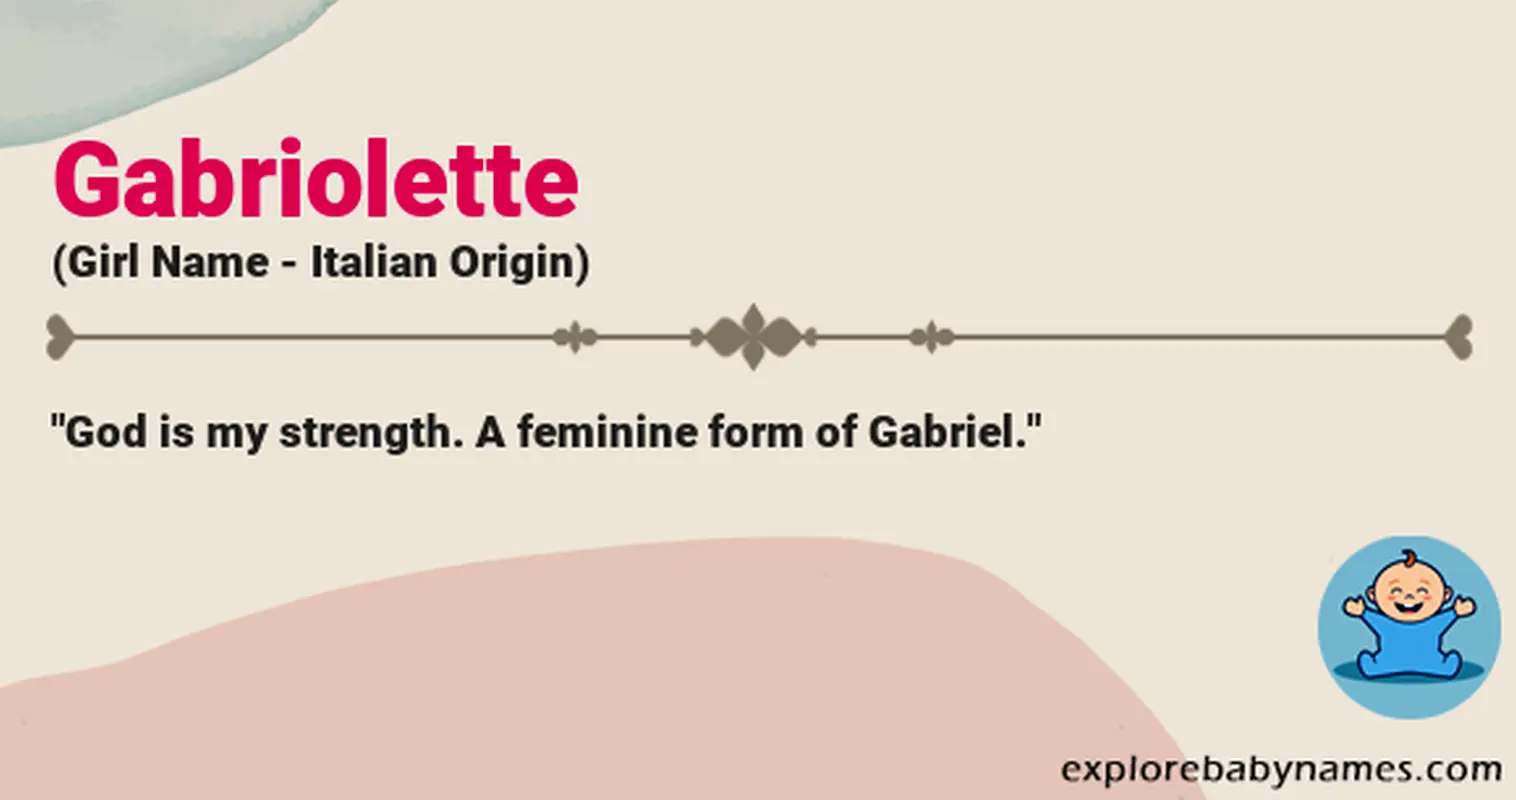 Meaning of Gabriolette